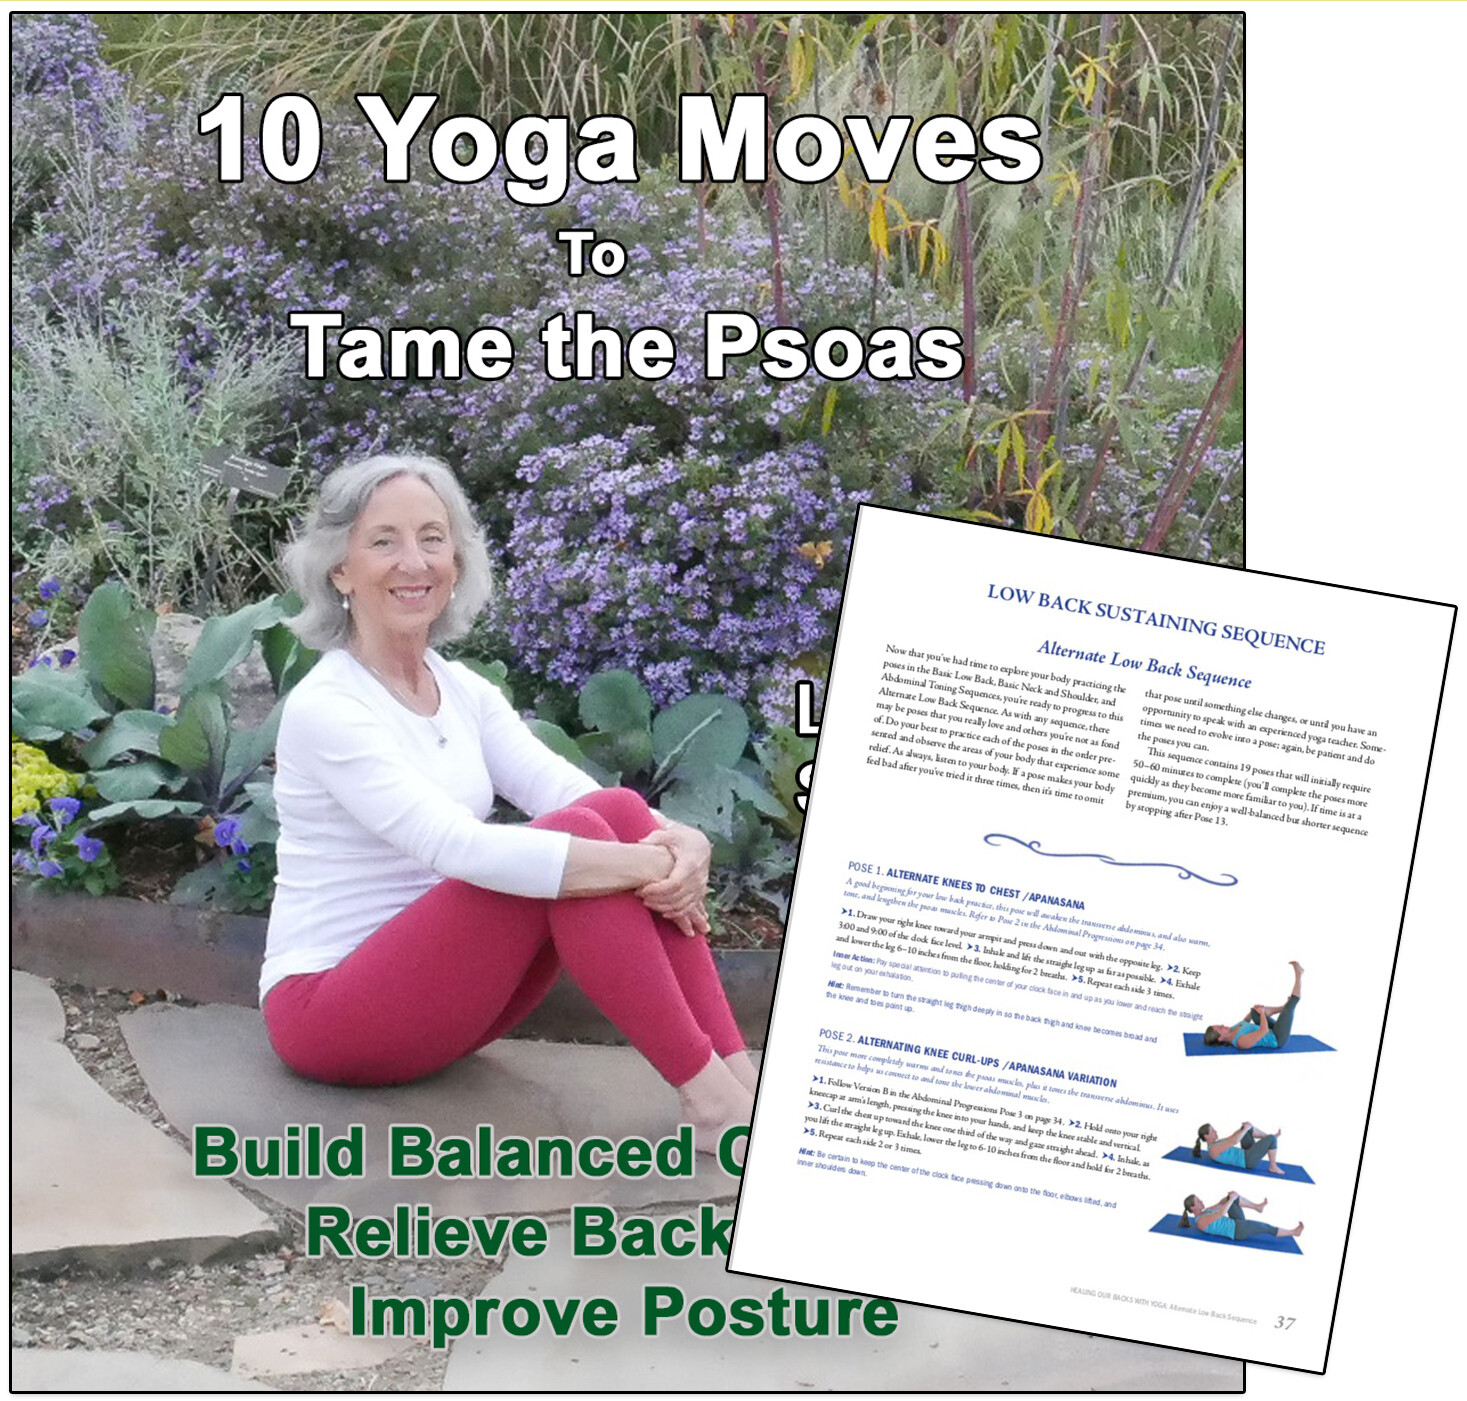 10 Yoga Moves to Tame the Psoas & Reduce Back Pain